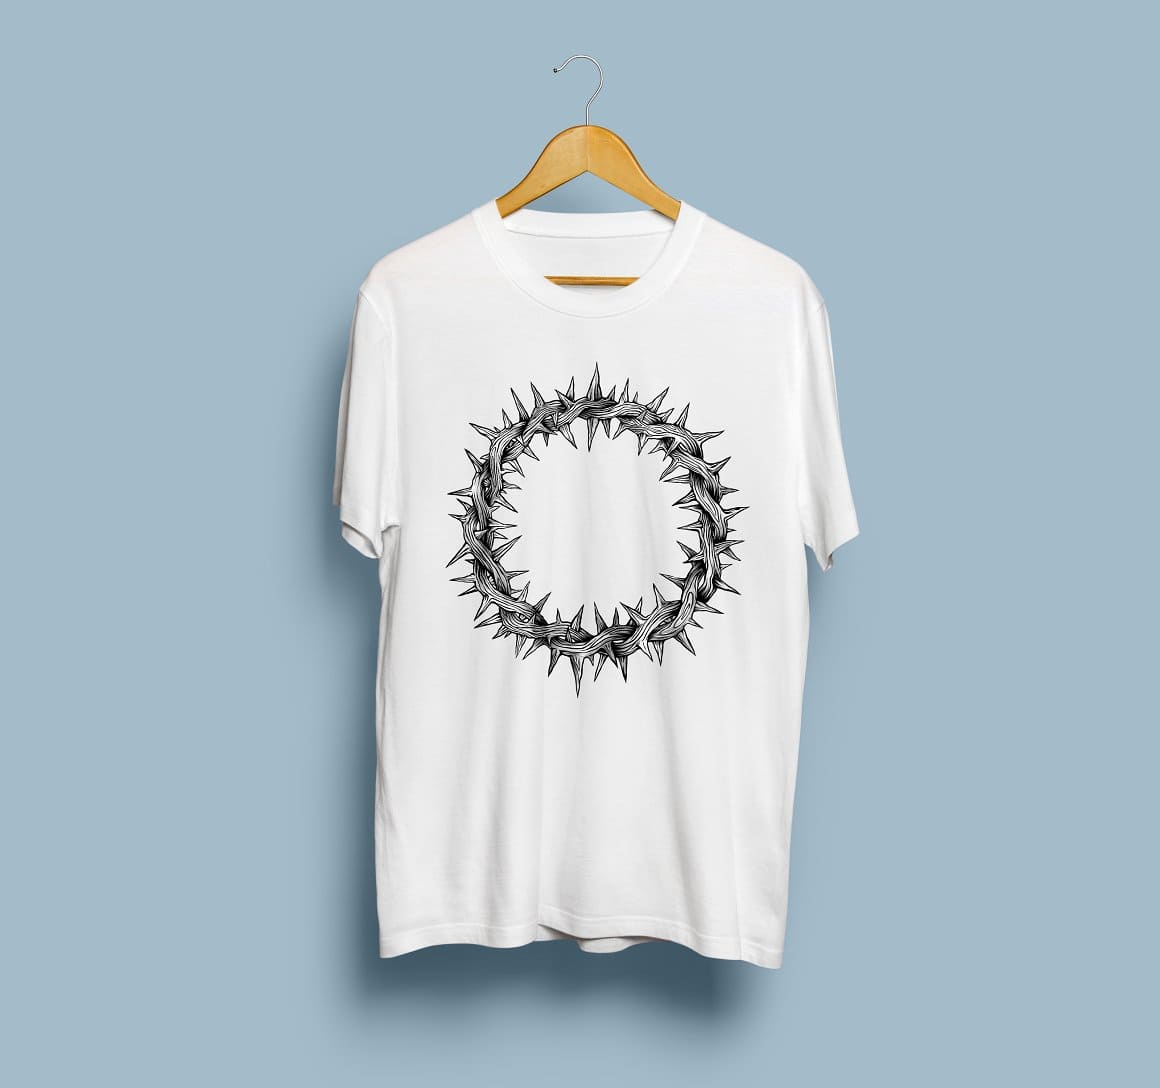 A crown of thorns is depicted on a white men's T-shirt.